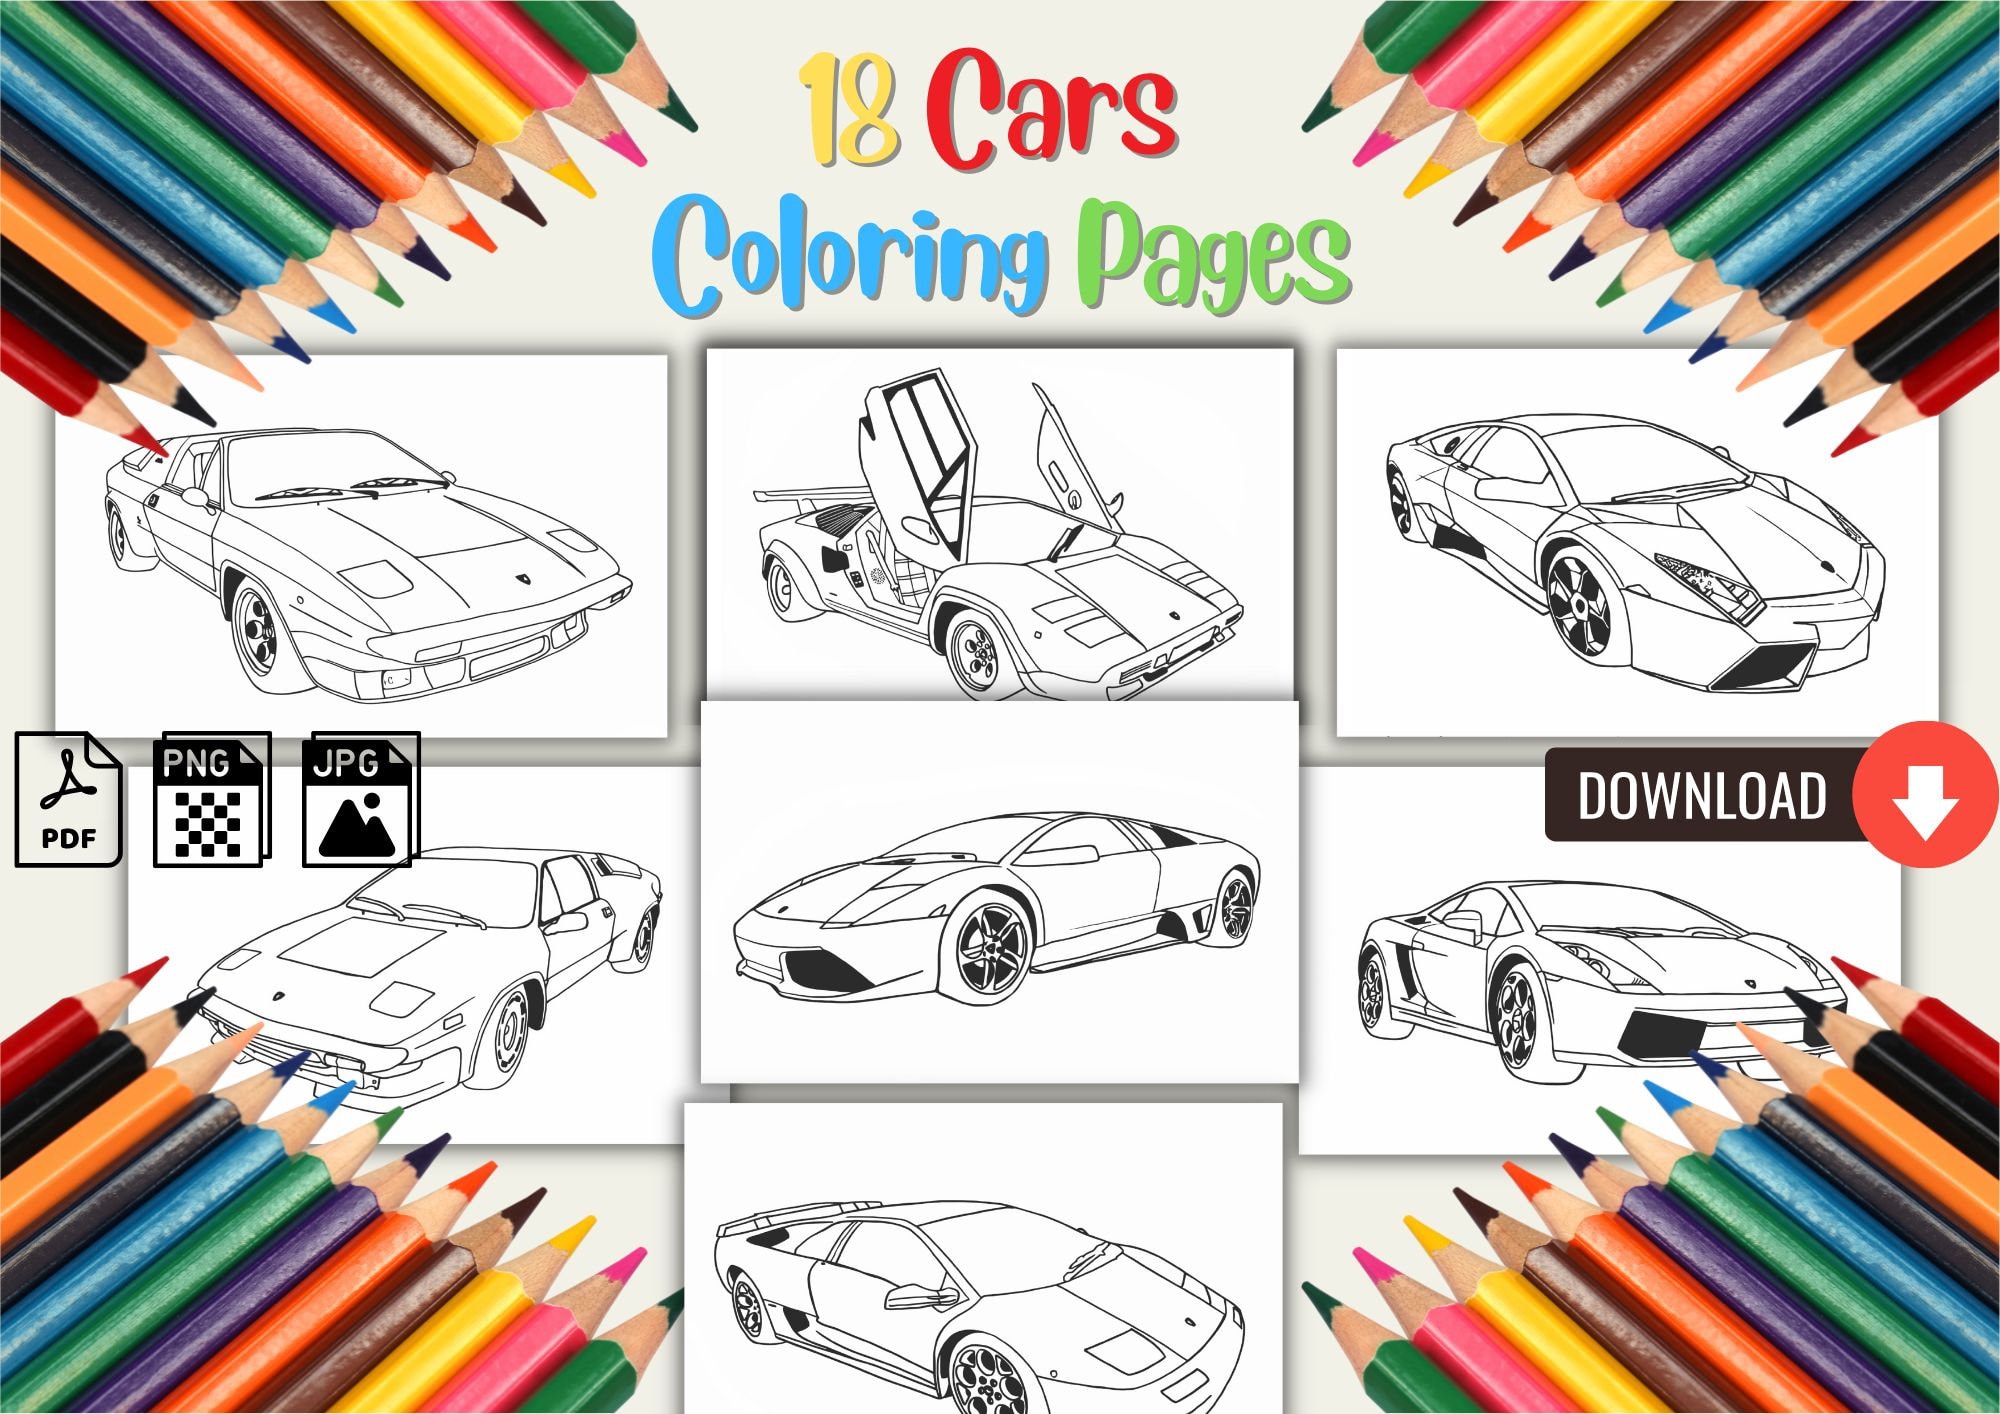 Finger Painting Book: For Kids, Cars, Construction Vehicles and Balls  Coloring Book